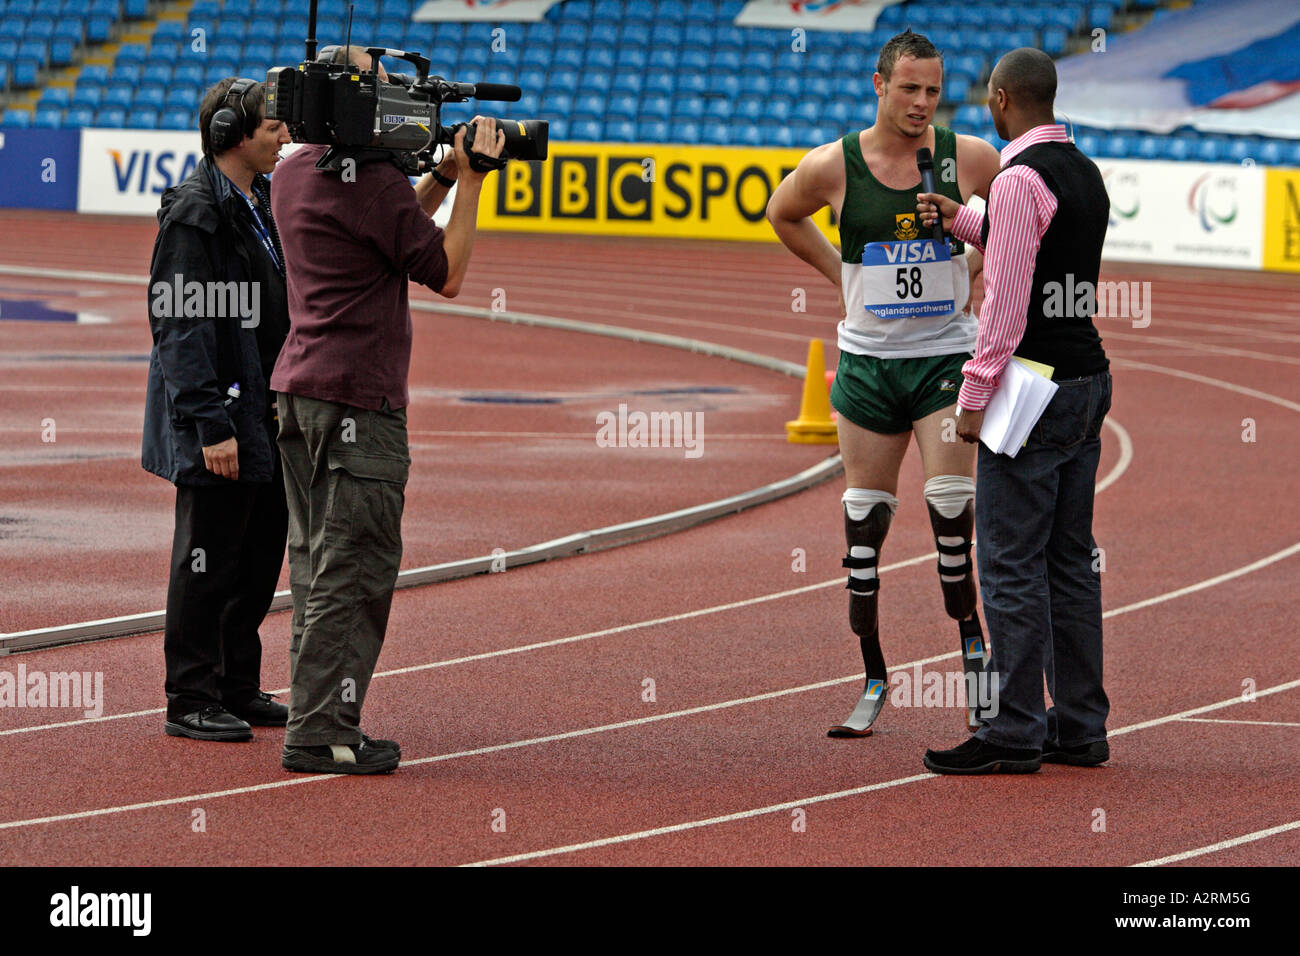 Oscar Pistorius of South Africa being interviewed by Colin Jackson for BBC Sport after winning the men's T44 200m Stock Photo